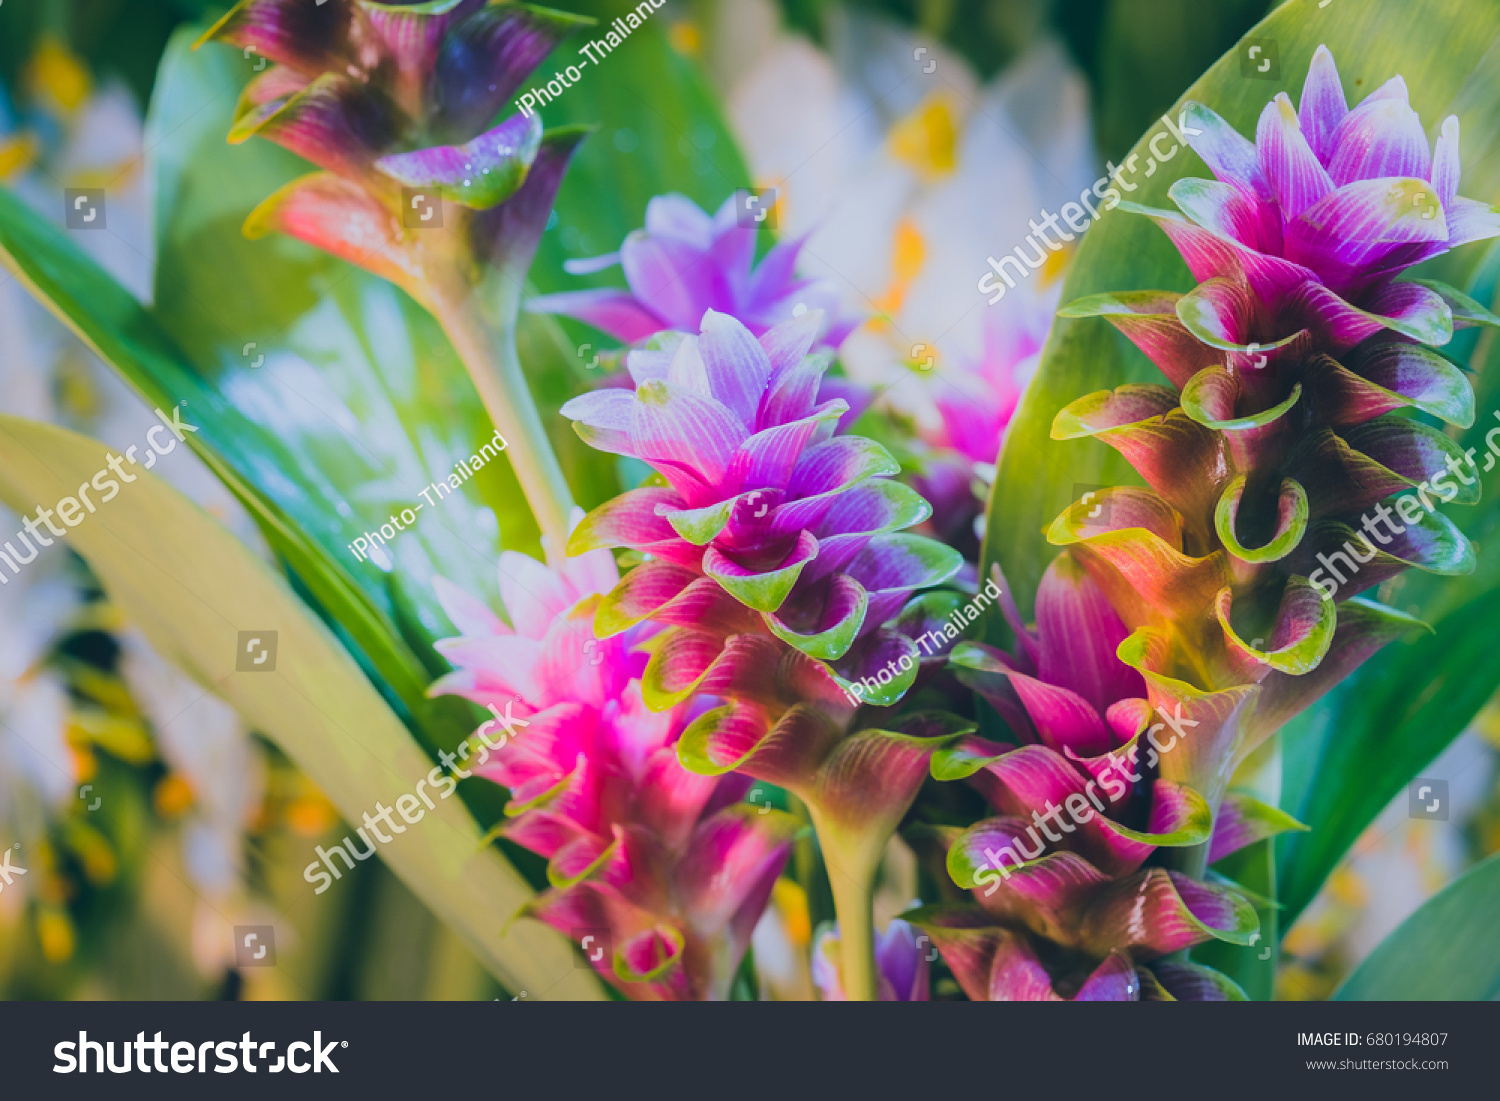 clos-up pink flower of Pink Siam Tulip or Curcuma sessilis flower It is a flower with a beautiful pink color to blossom when it enters the rainy season in Thaialnd. #680194807